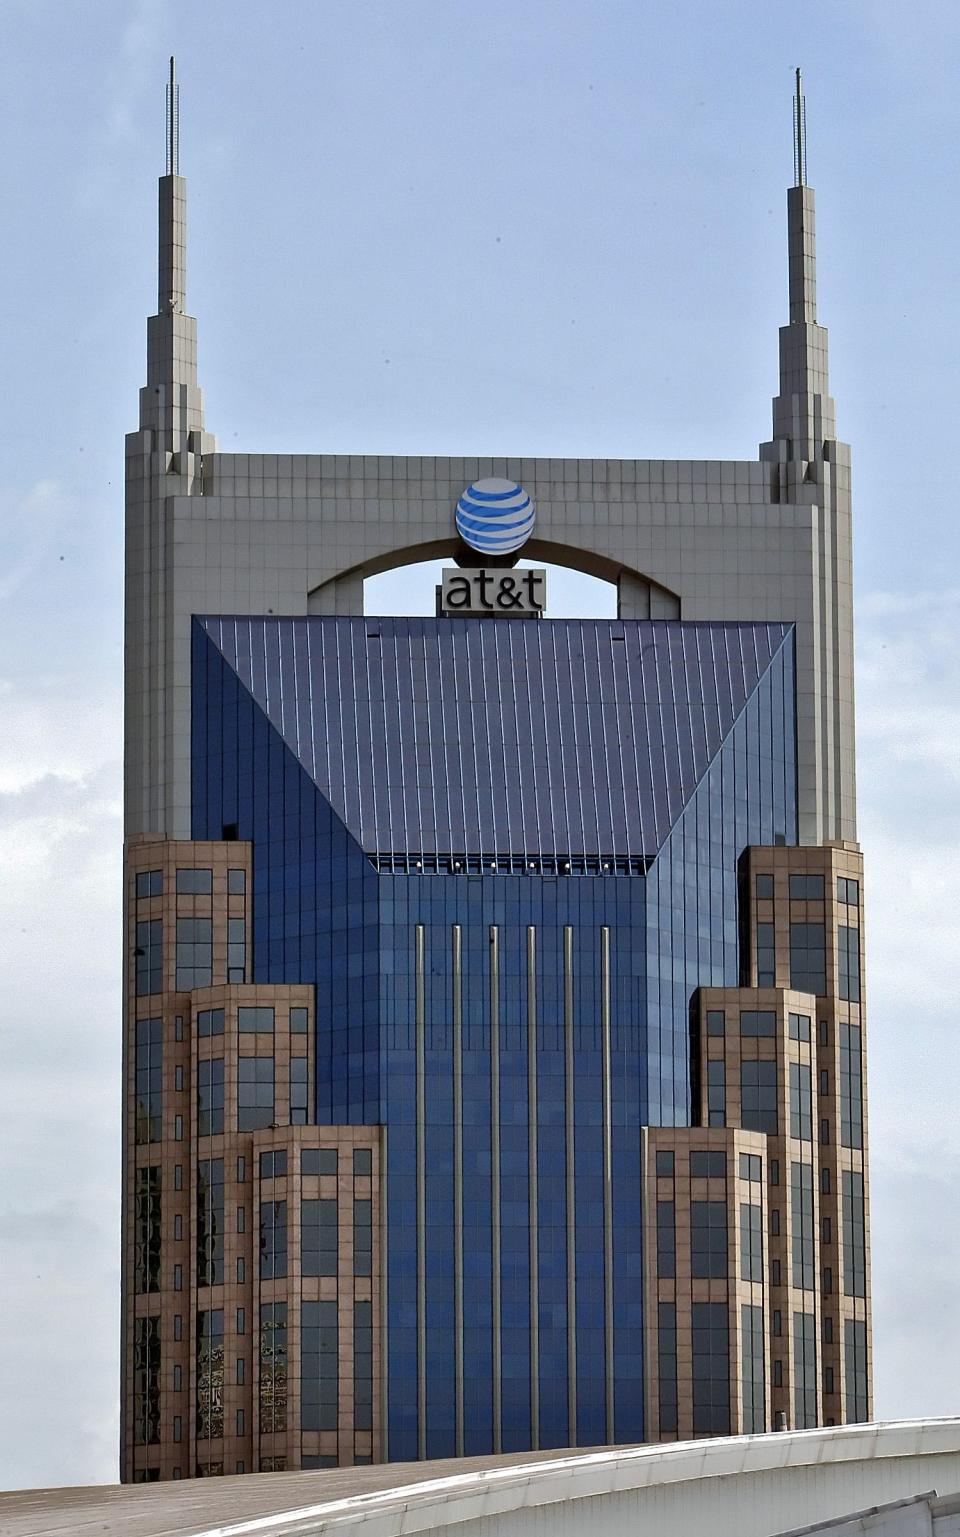 A view of the AT&T Building in Nashville, commonly known as the "Batman Building."